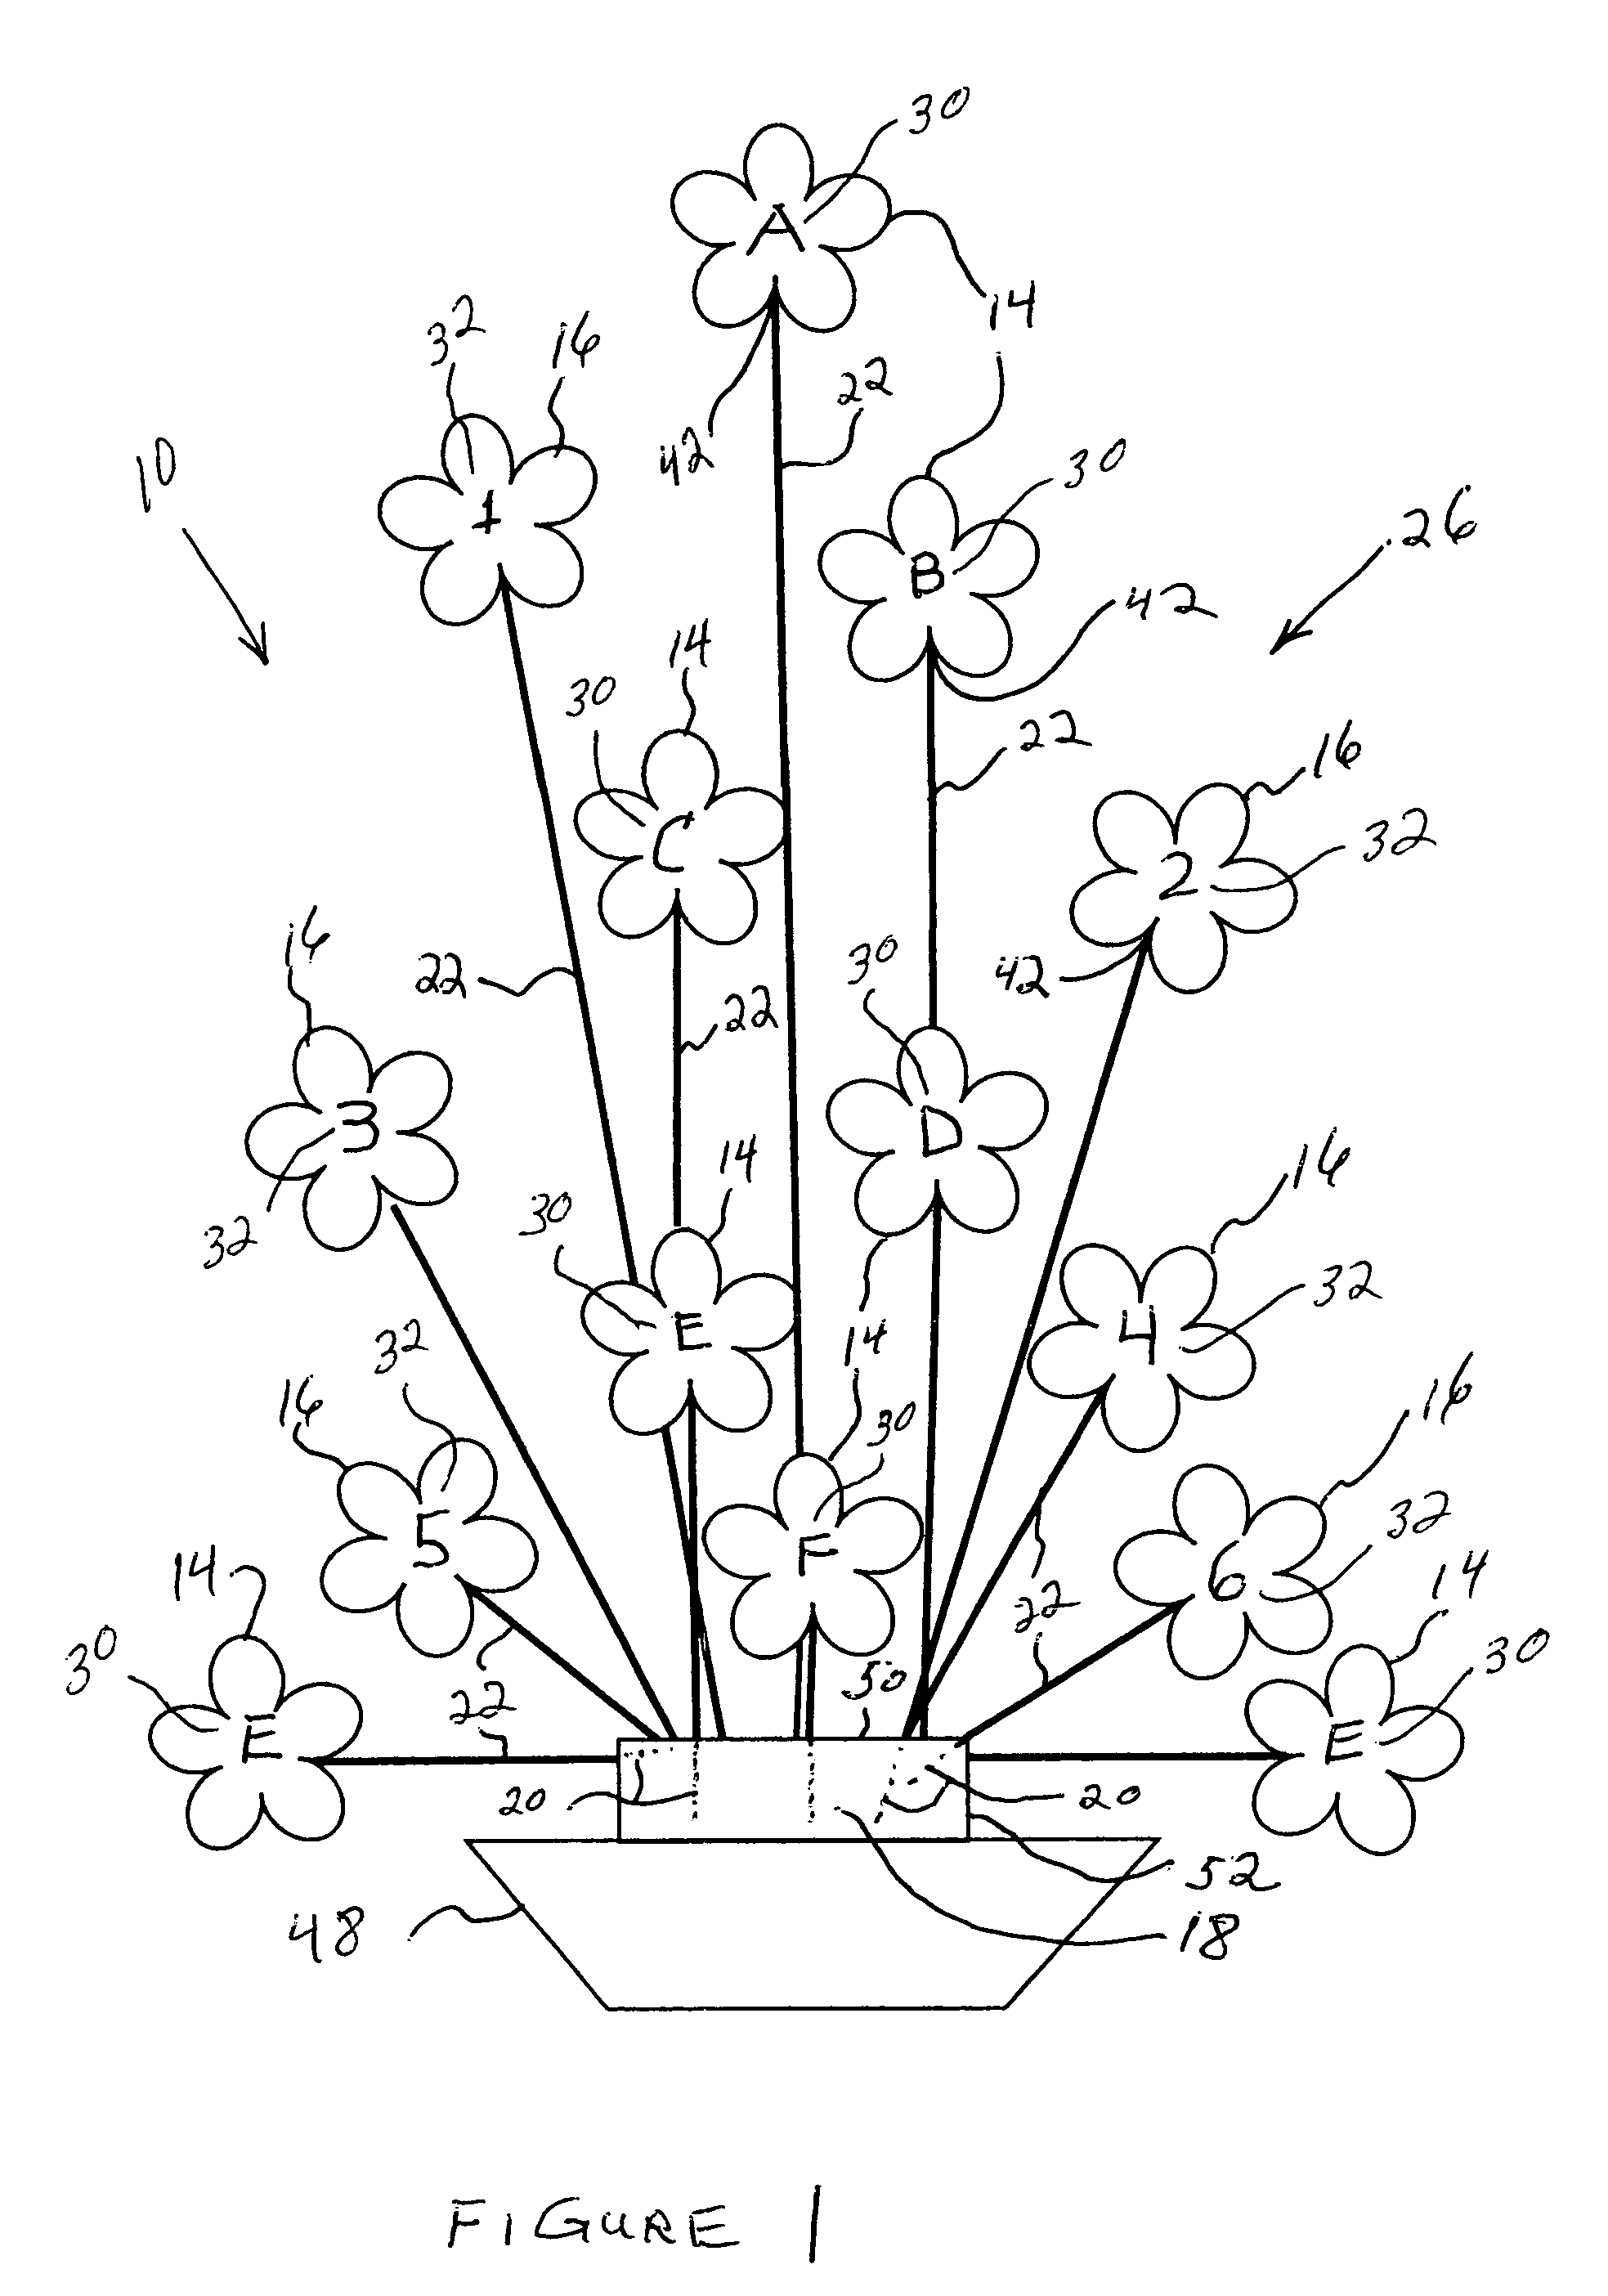 Device and method for arranging flowers